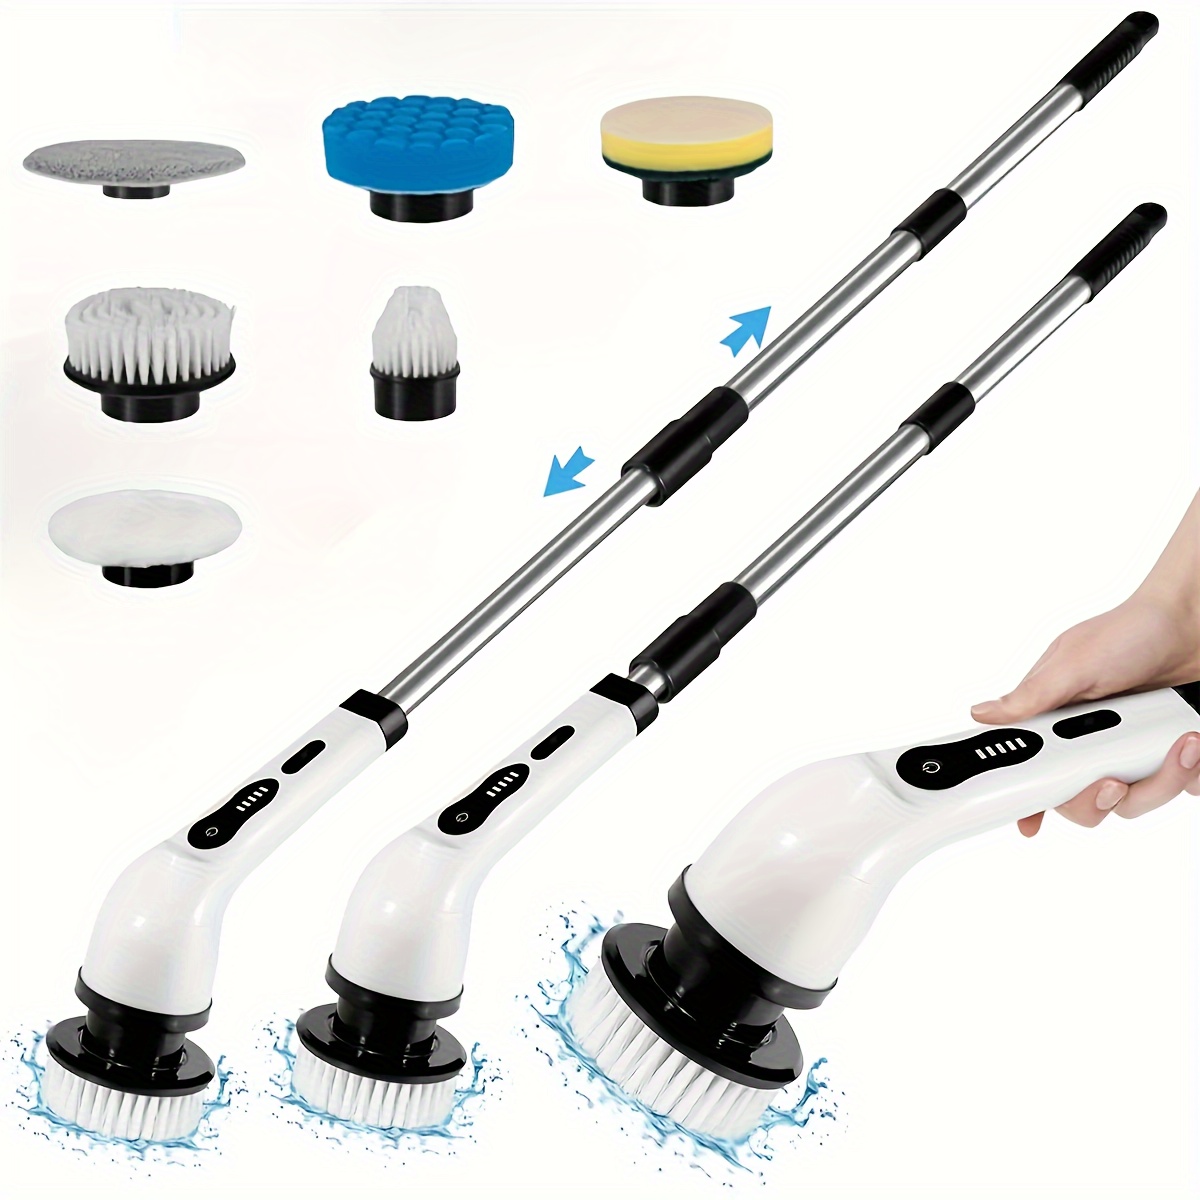 

1 Pack Electric Spin Scrubber, Cordless Shower Scrubber With 6 Replaceable Brush Heads, Electric Cleaning Brush With Dual Speeds & Extension Handle, Power Scrubber For Bathroom, Tile, Toilet, Floor